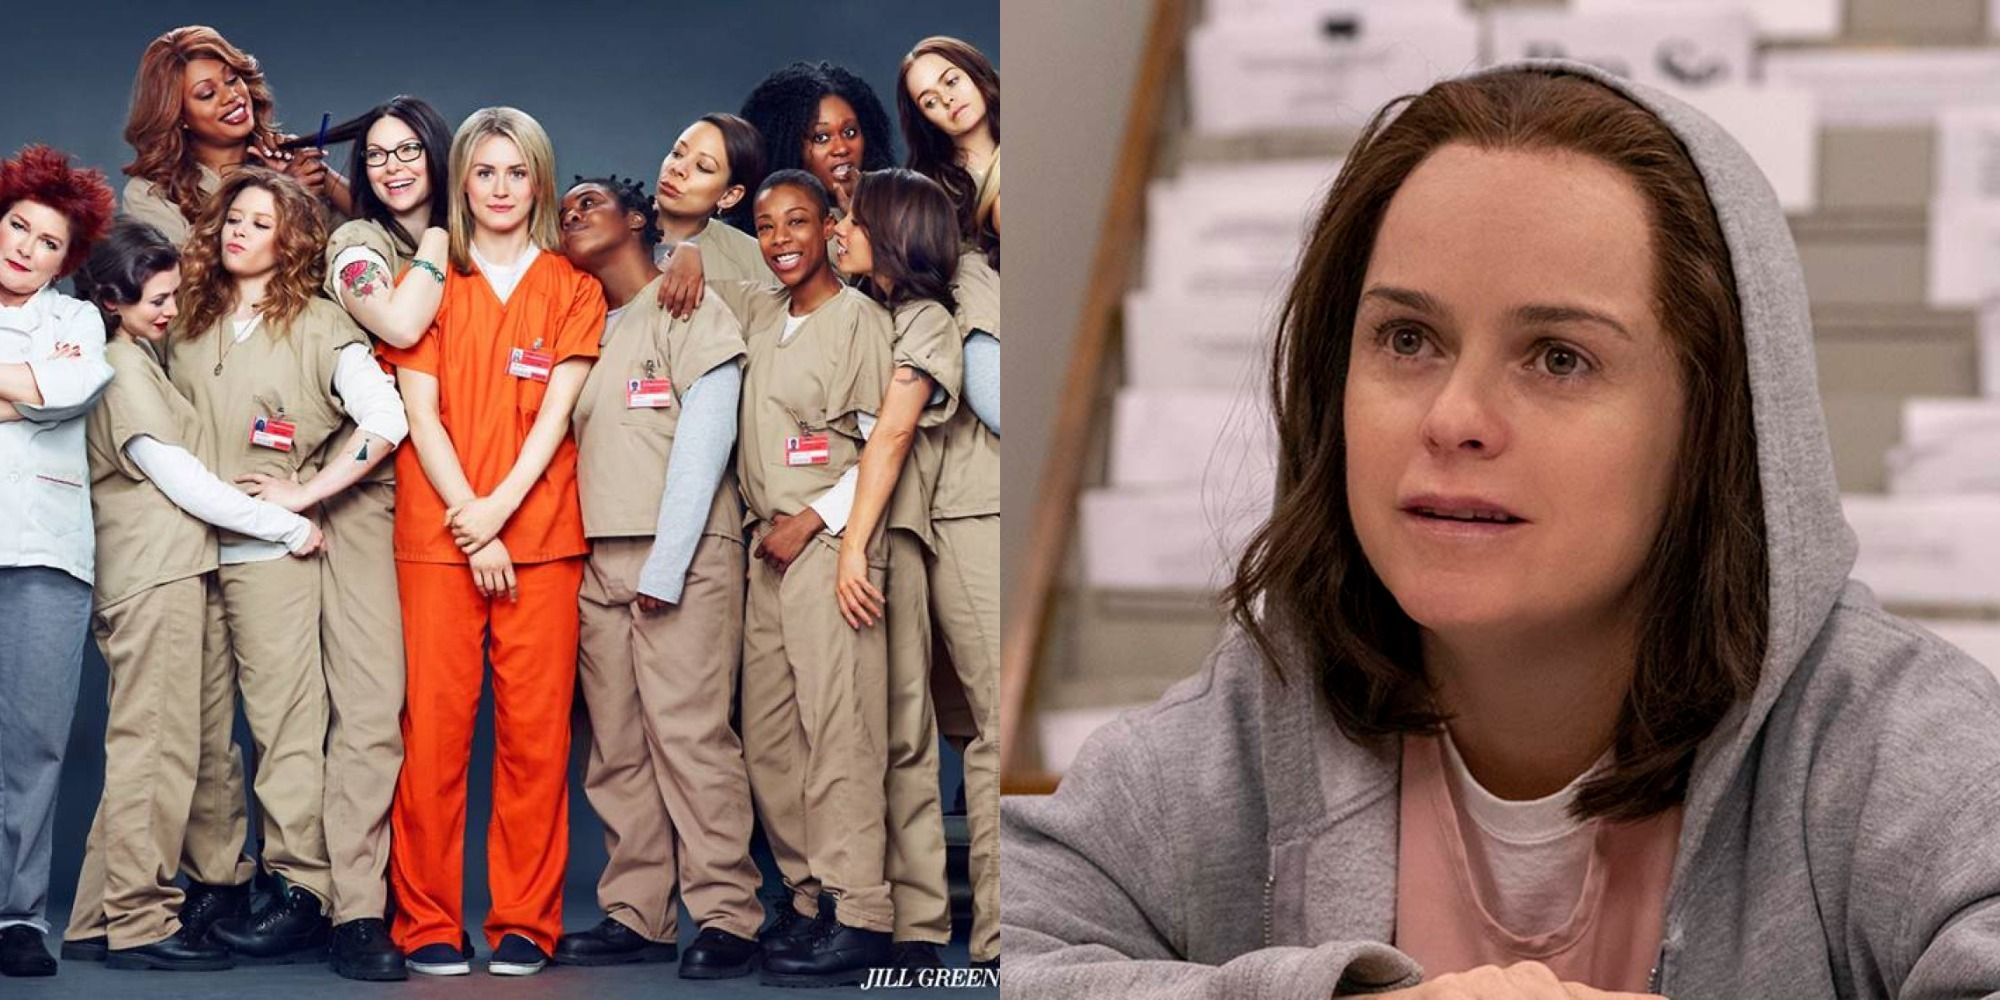 Split image showing the cast of OITNB and Pennsatucky